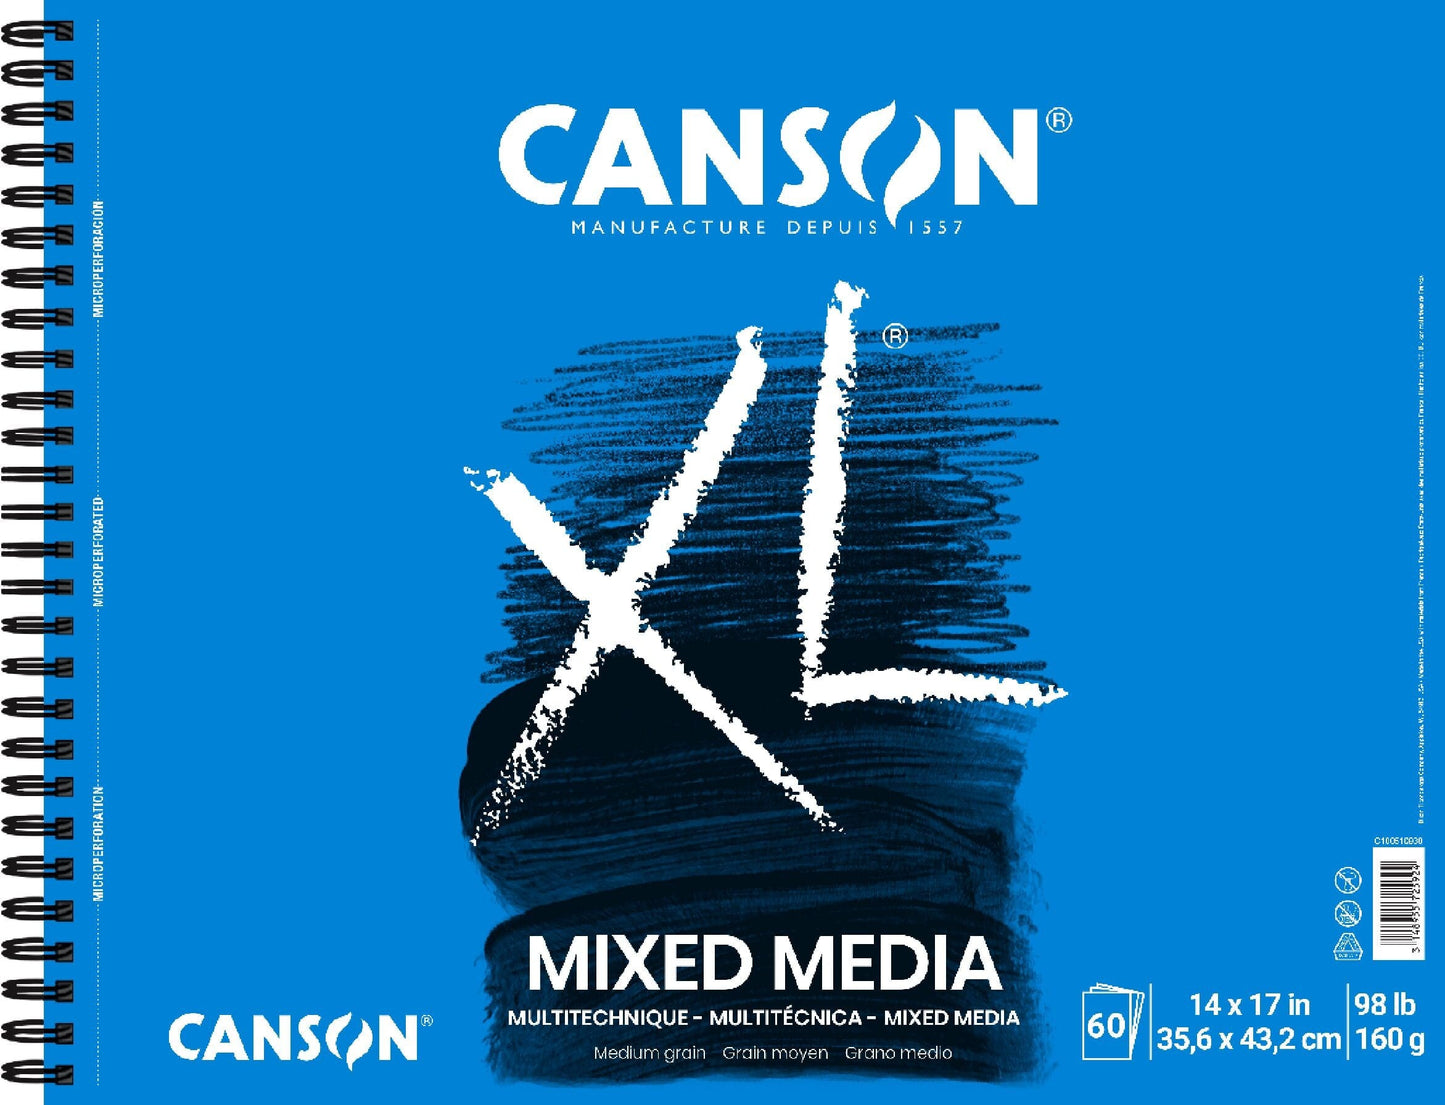 Canson XL Series Mix Media Pad, 11X14 Side Wire 2-Pack